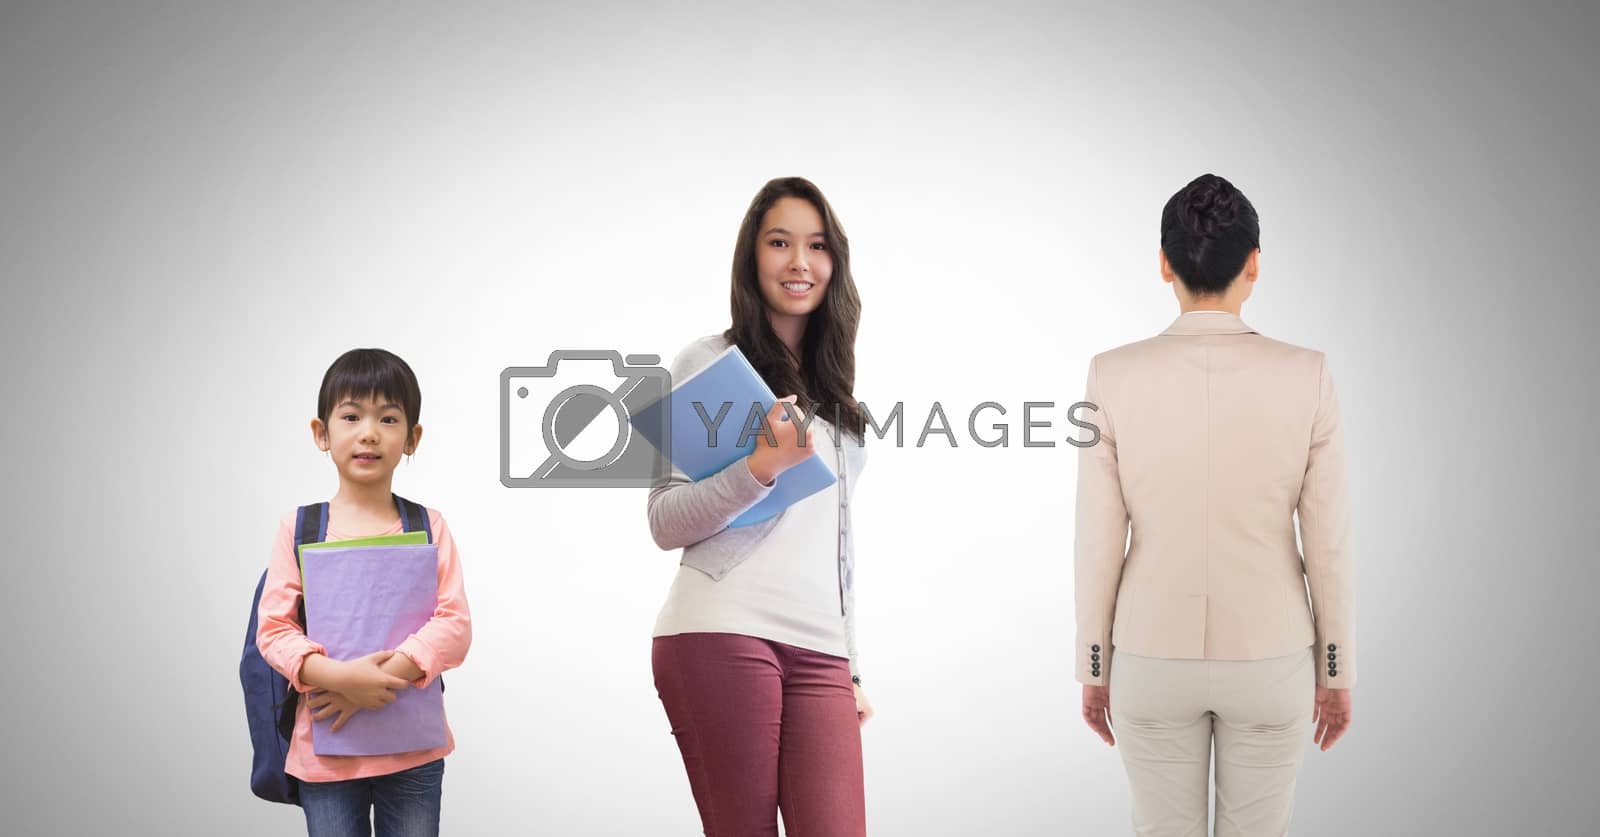 Royalty free image of Educated Women of age generations growing up by Wavebreakmedia